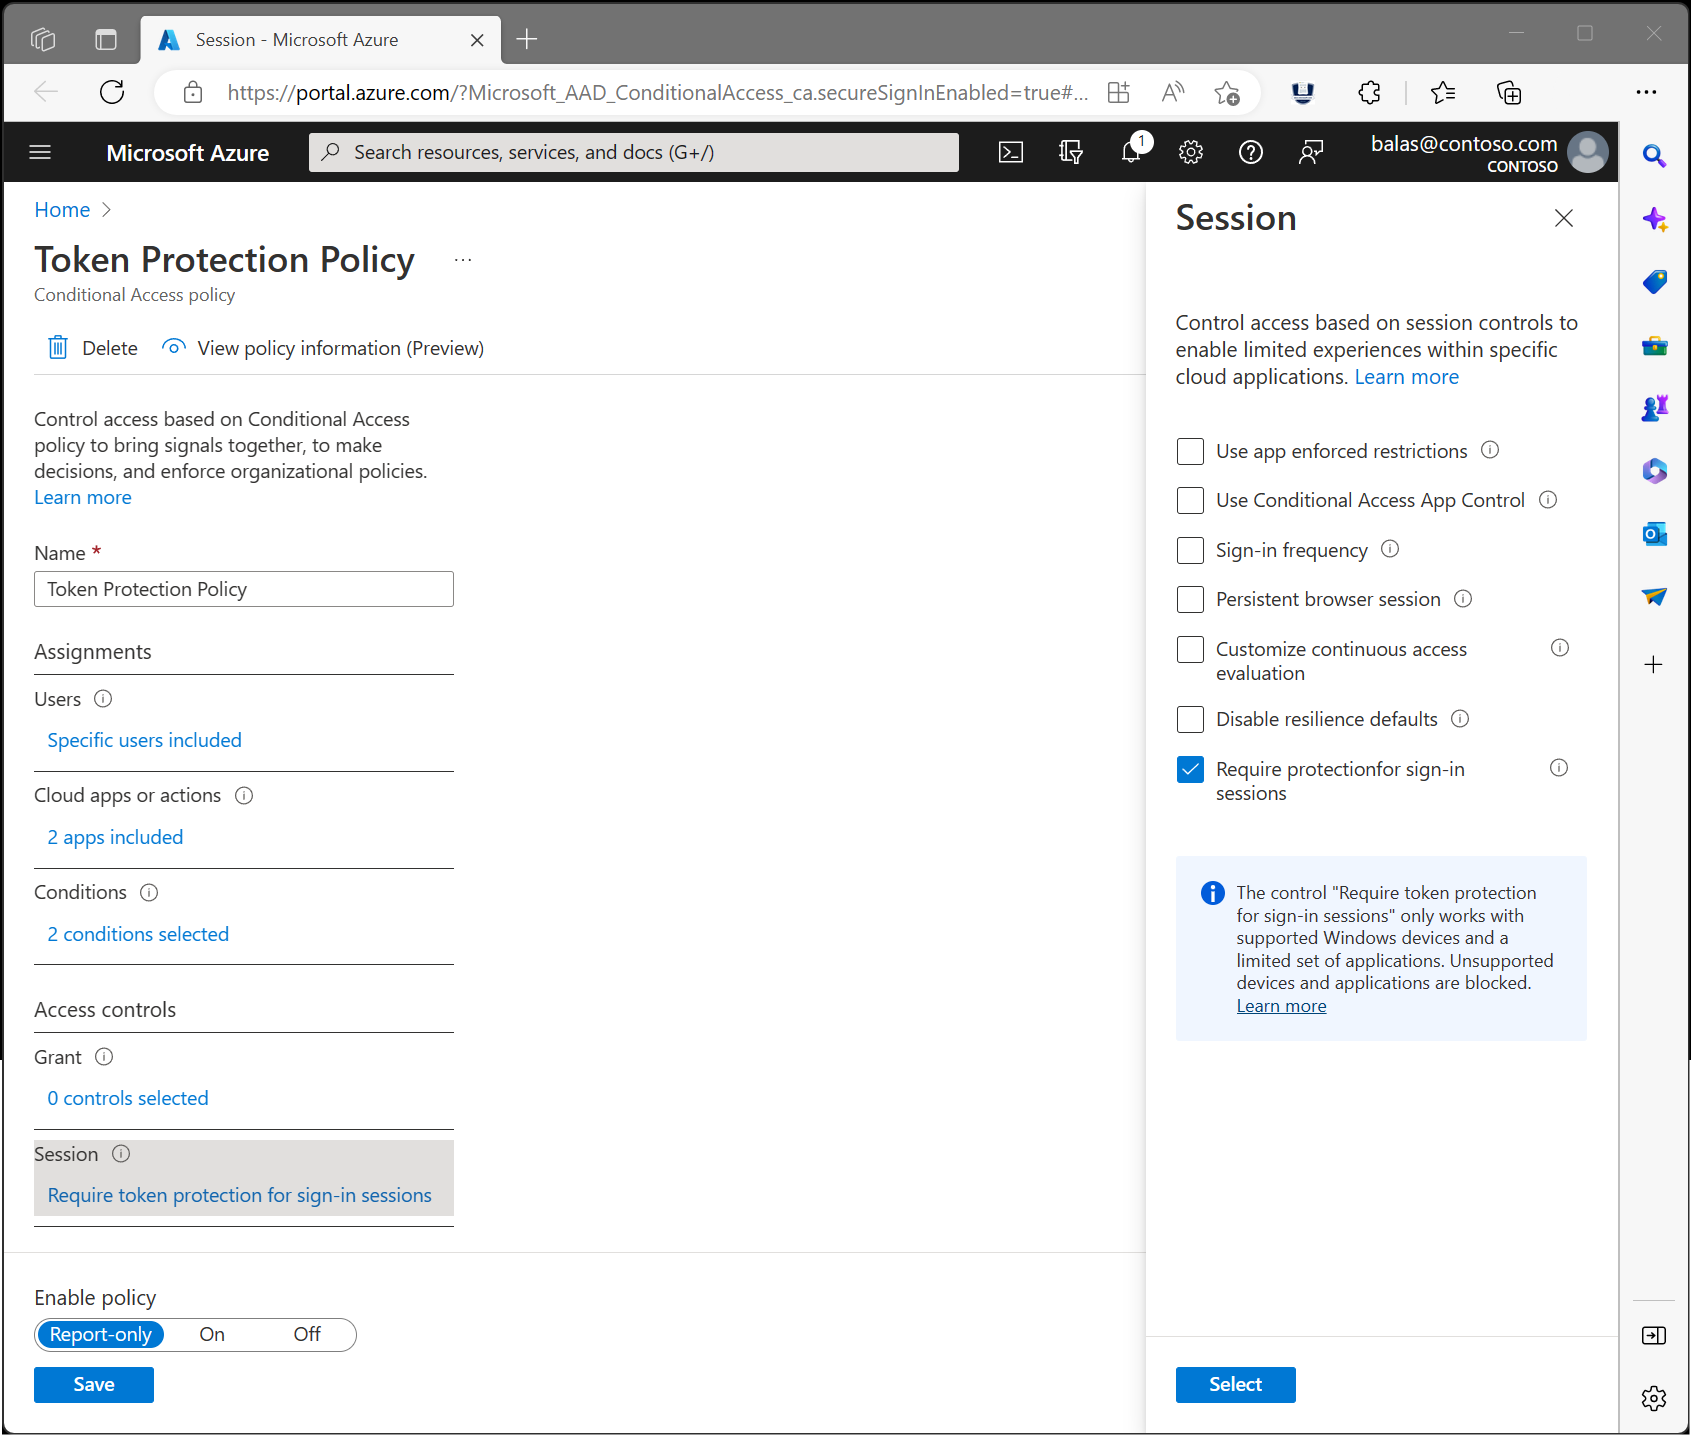 Screenshot showing a Conditional Access policy requiring token protection as the session control